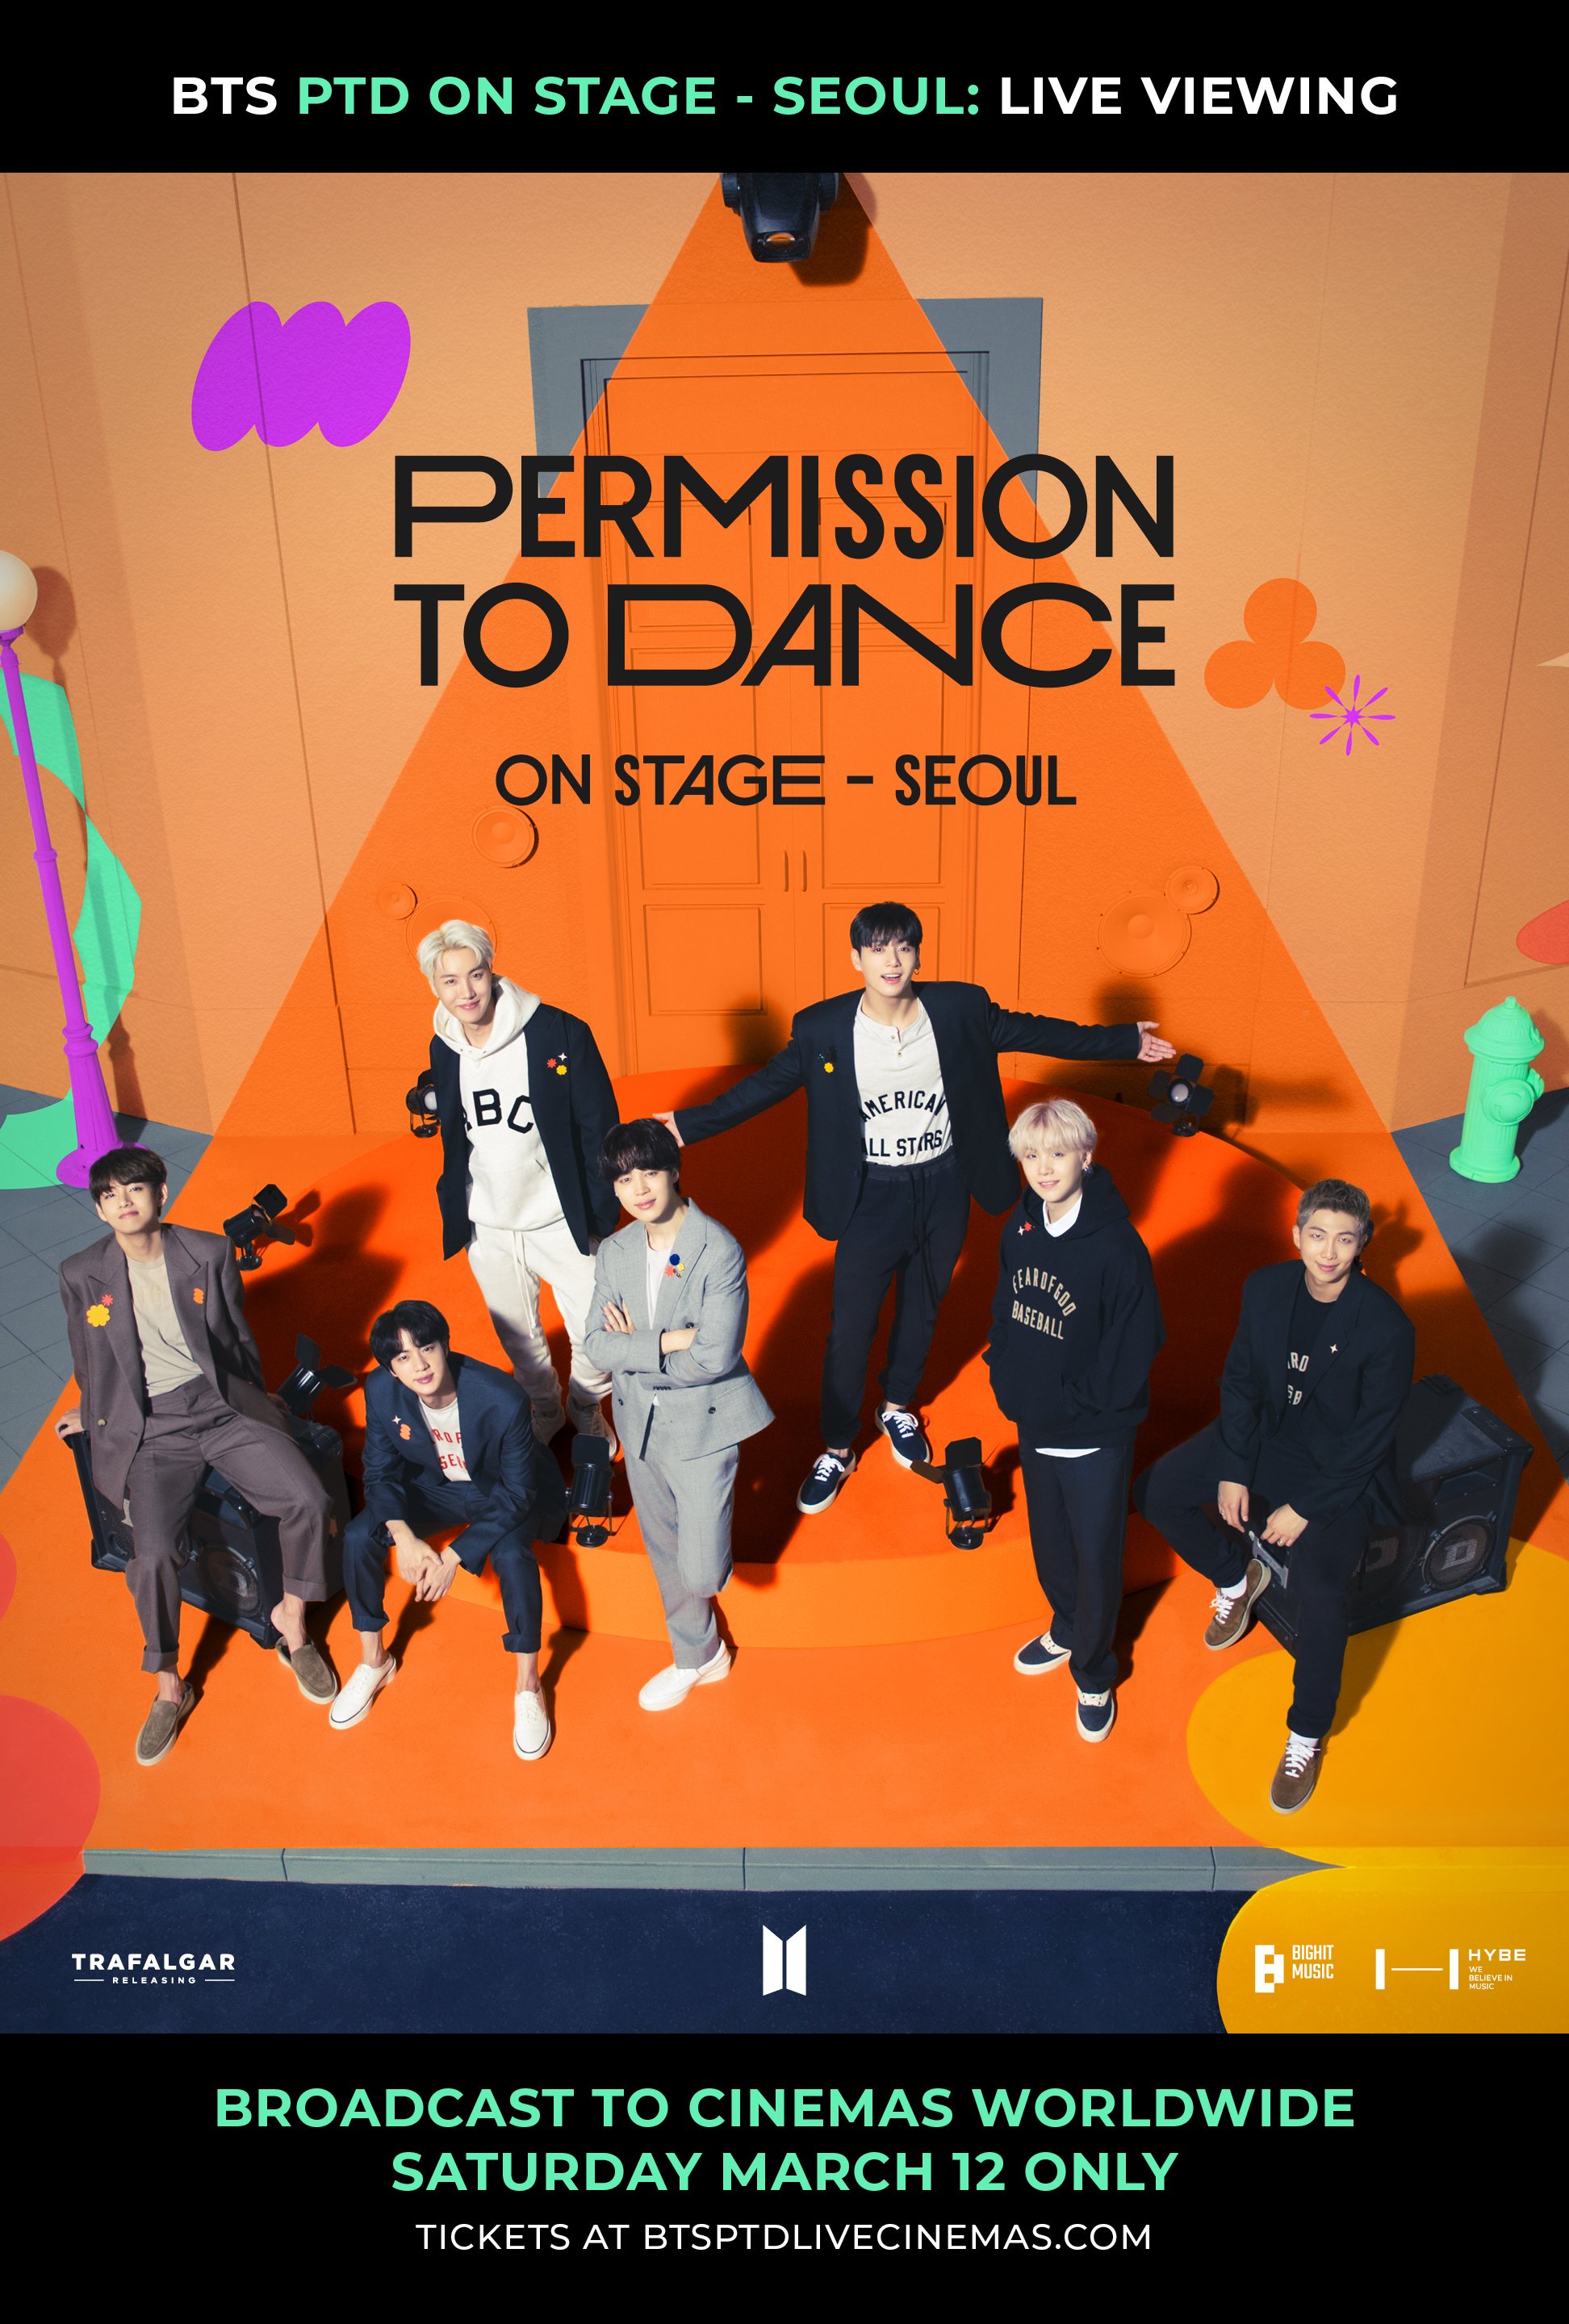 BTS Permission to Dance on Stage - Seoul: Live Viewing at an AMC 